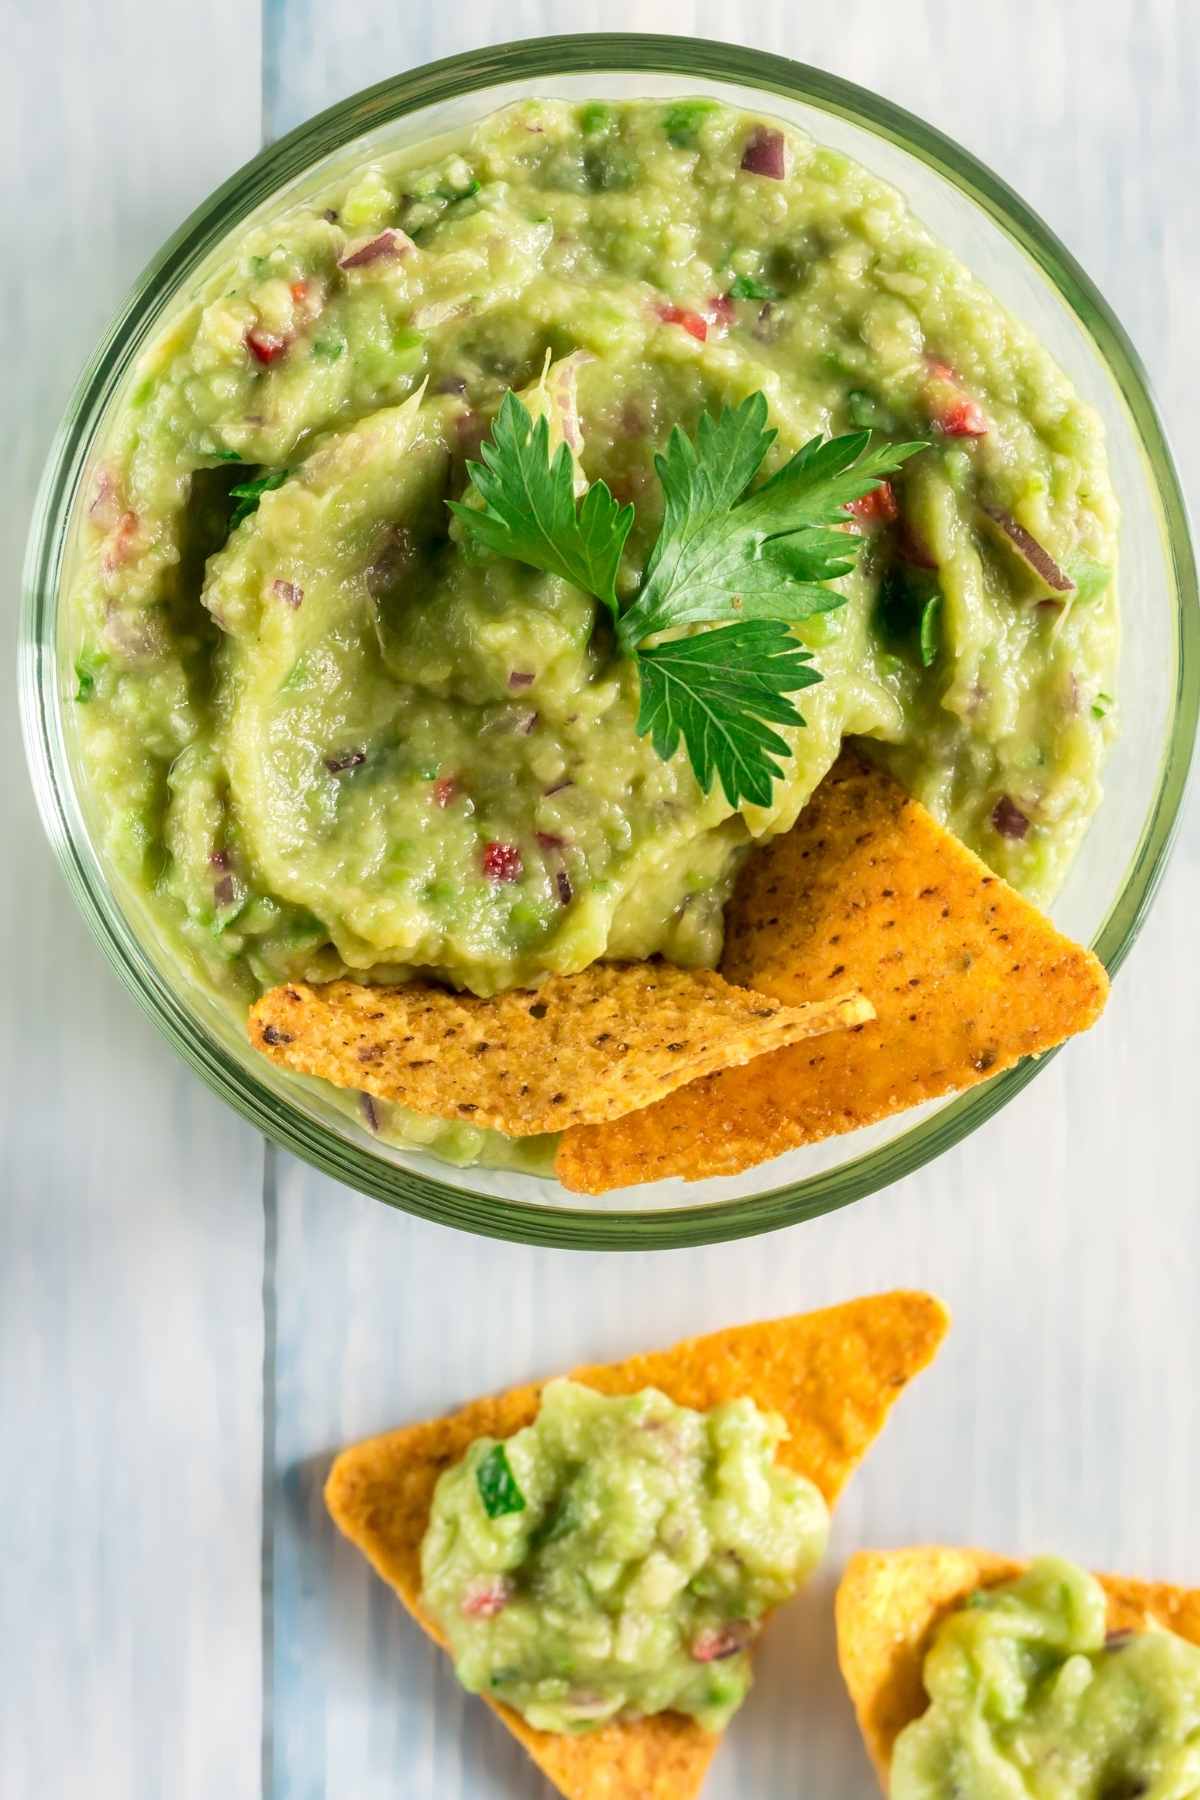 If you’ve been searching for guacamole that rivals anything you’ve had at a restaurant, this is the one. This Simple Homemade Guacamole Dip adapted from Alton Brown’s recipe is perfect to enjoy with your favorite Mexican dishes, and is also delicious served on toast!